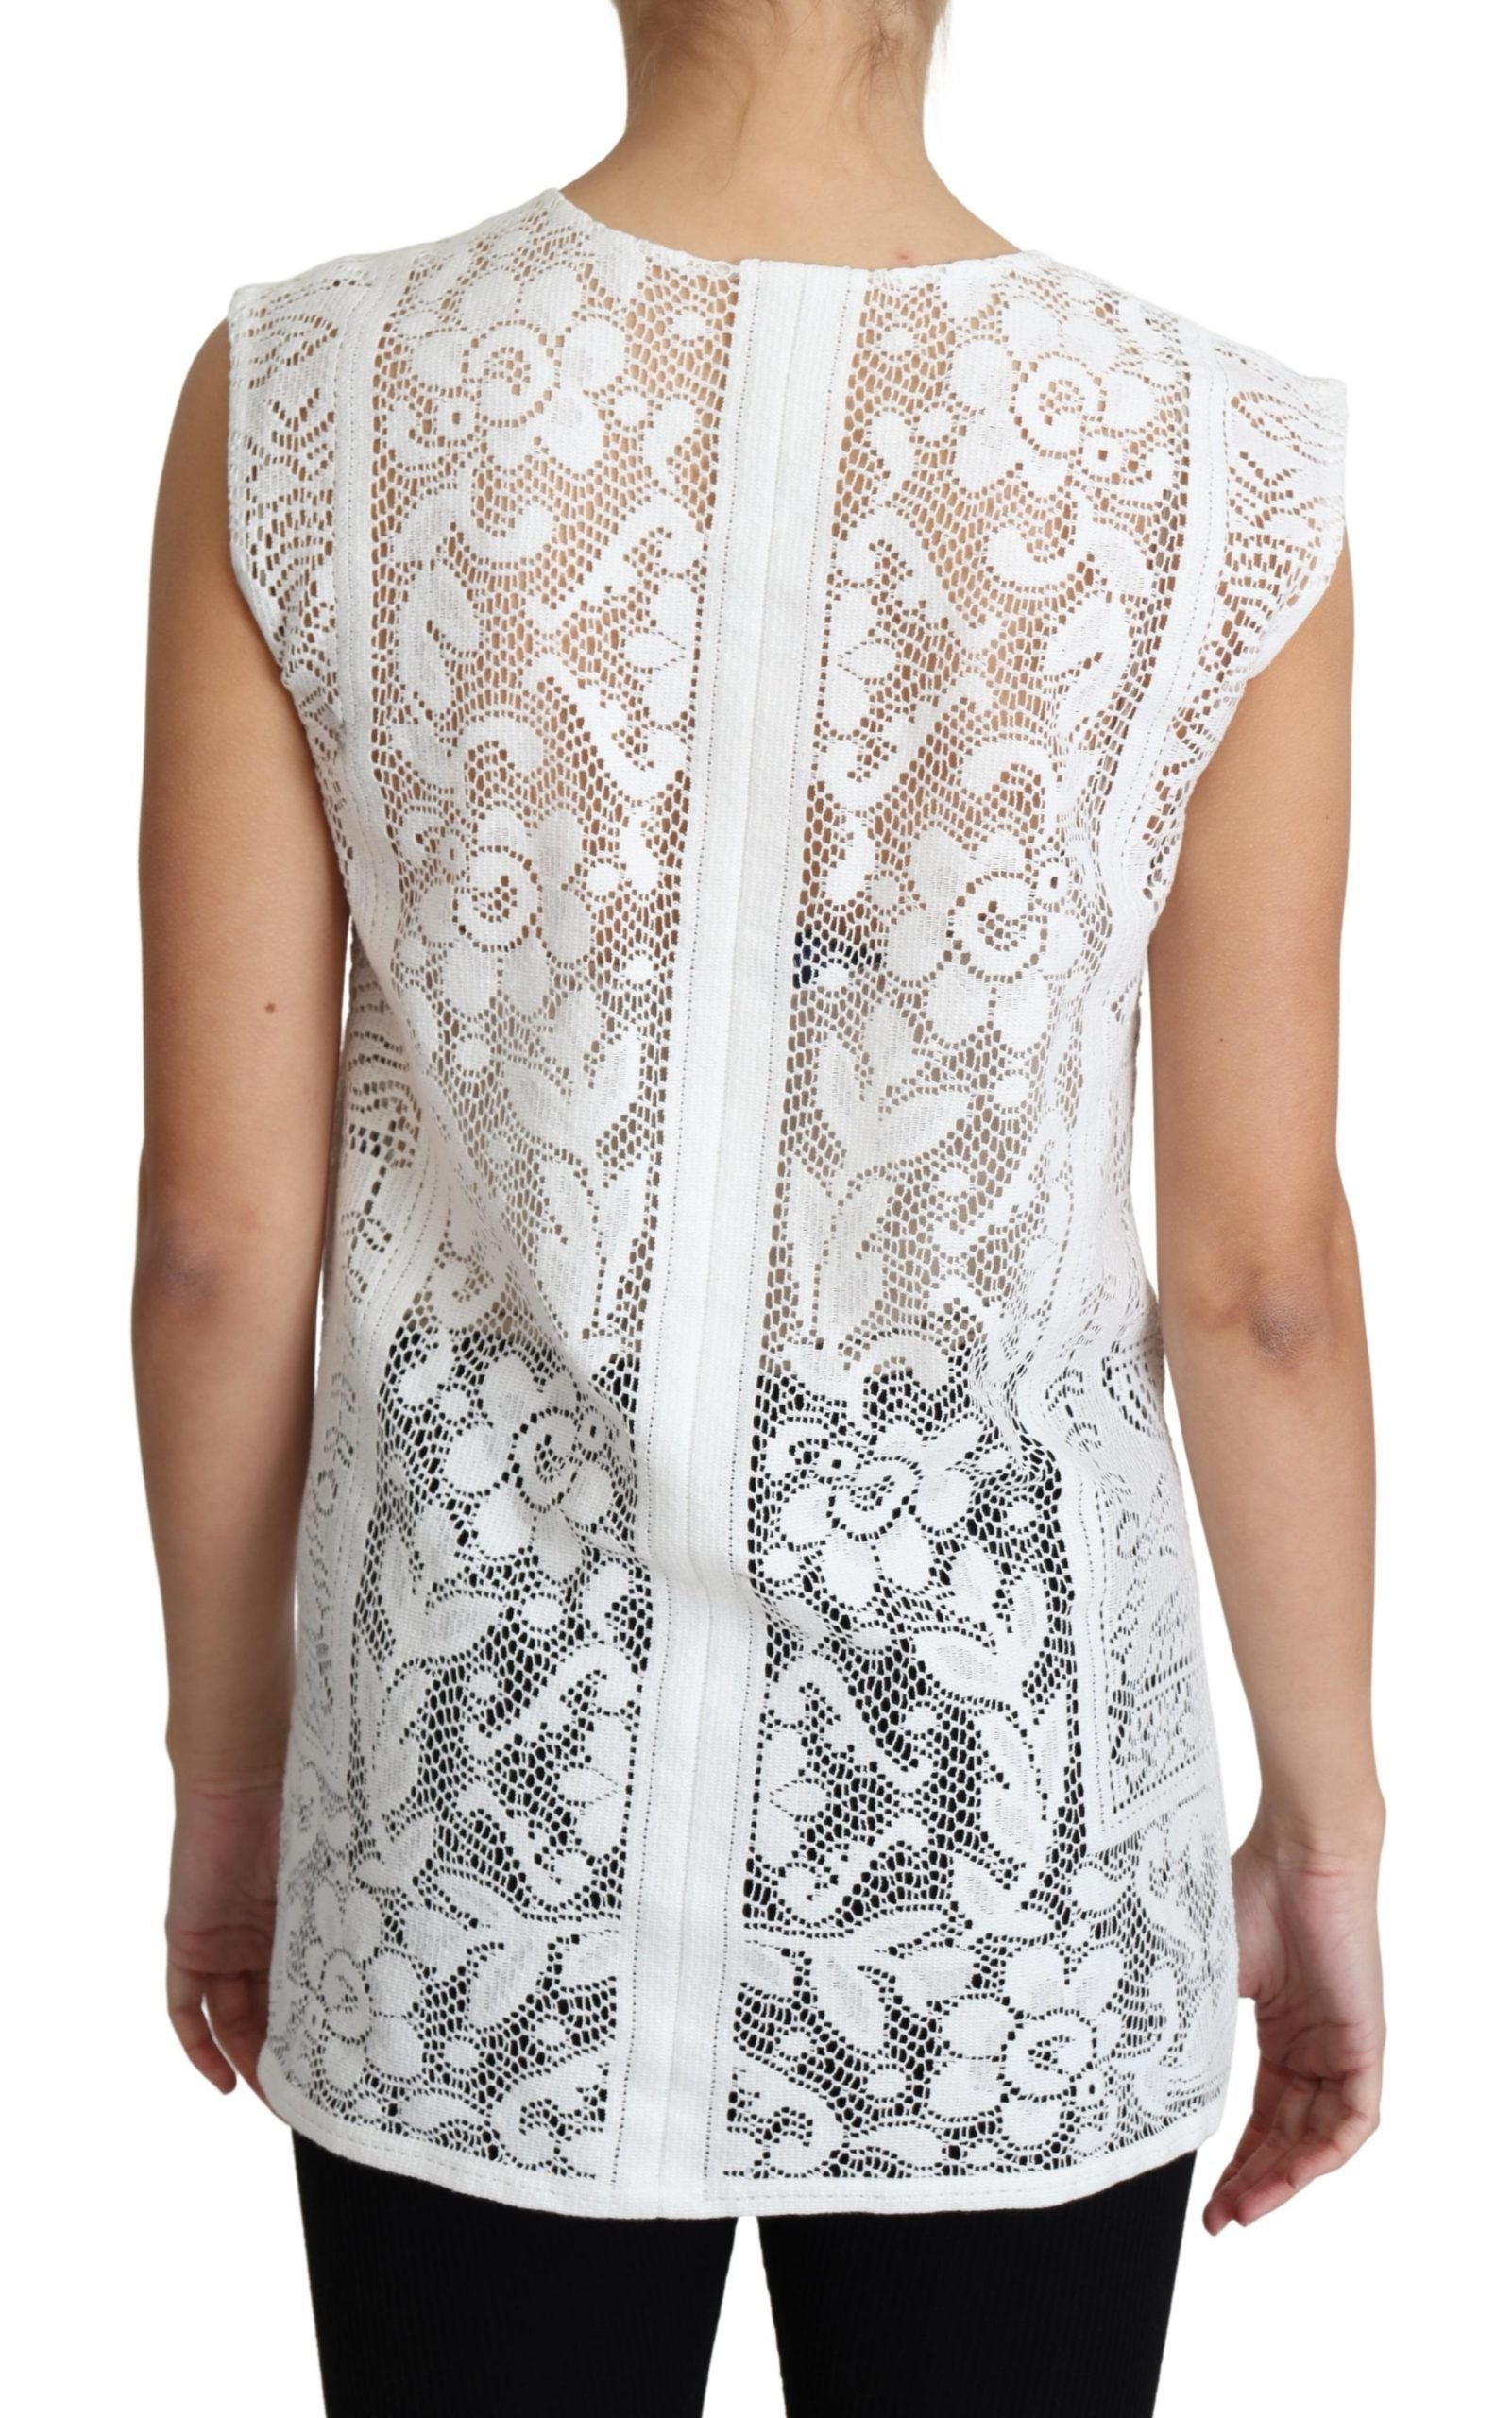 Dolce & Gabbana Chic Lace Floral Sleeveless Top